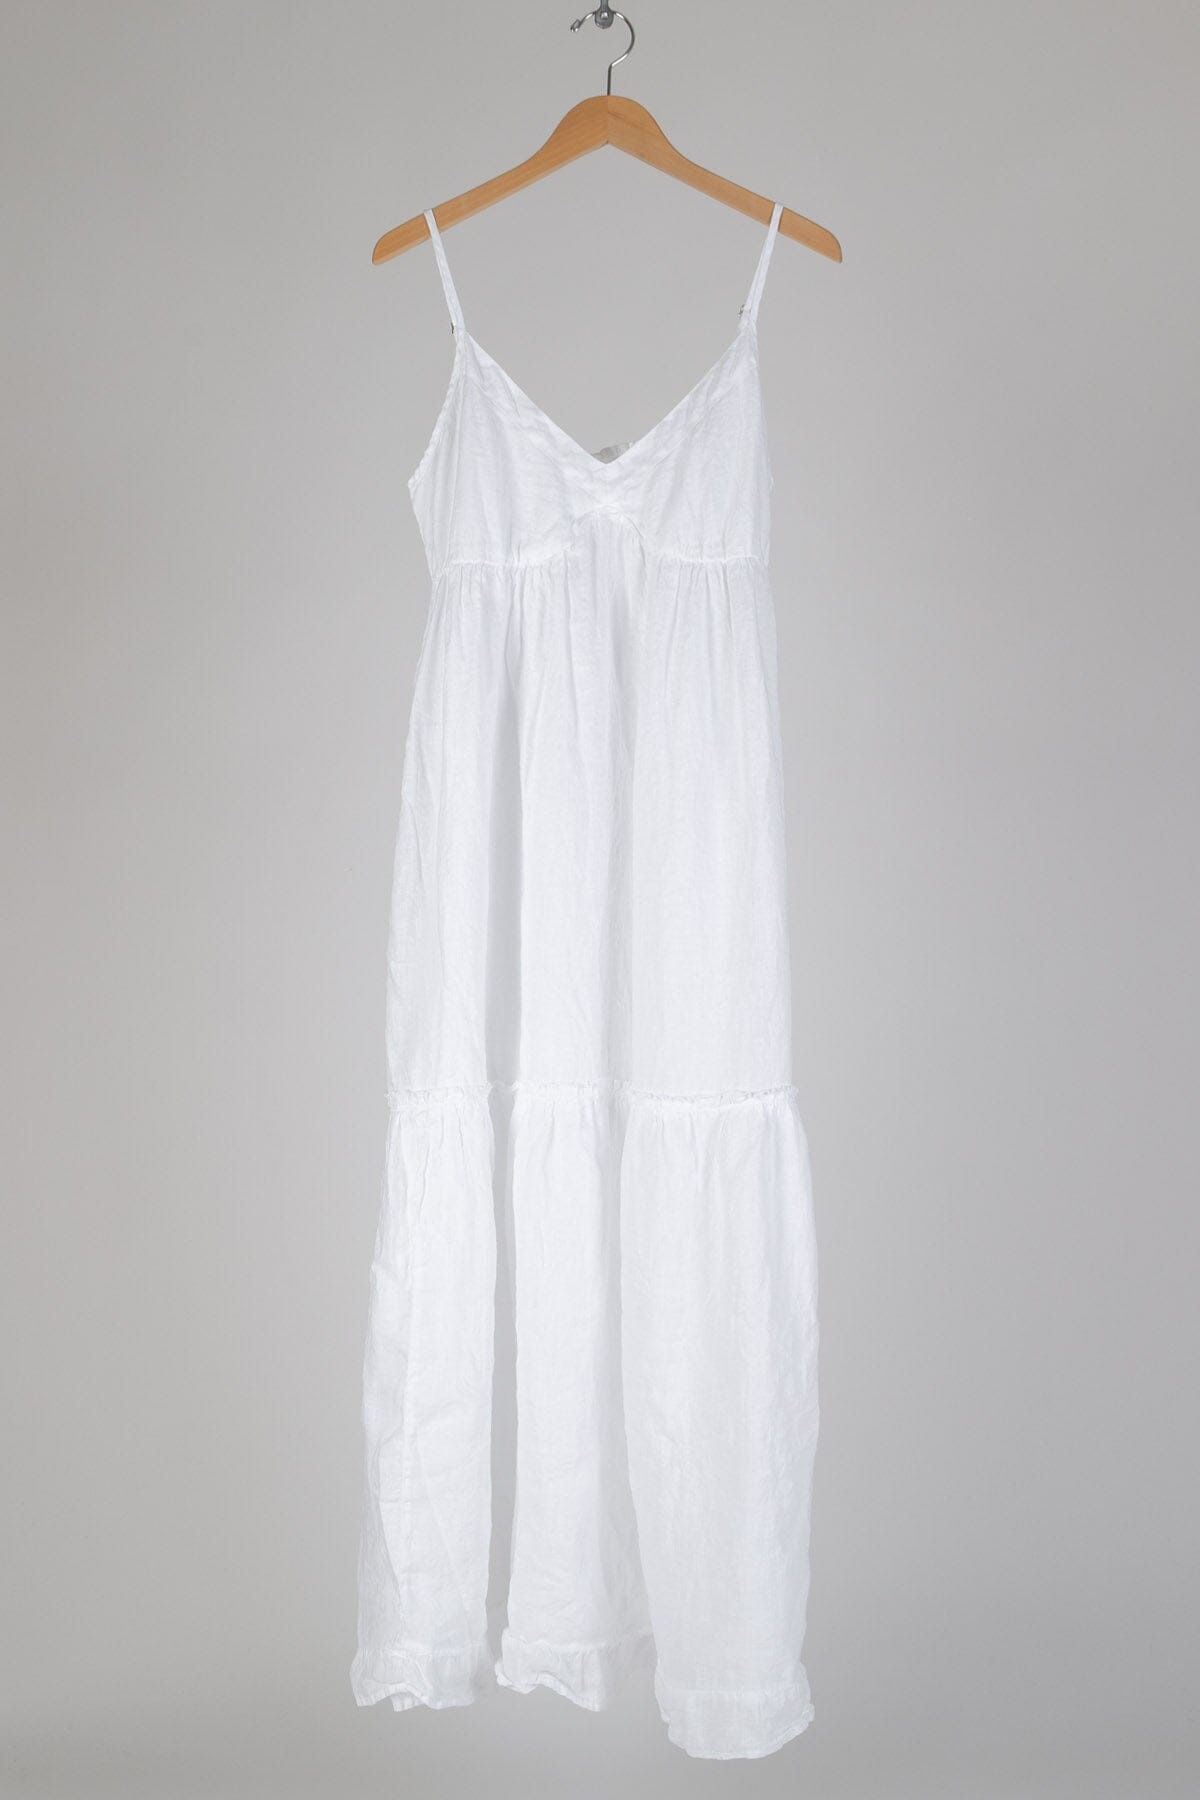 Isabella - Linen S17 - Solid Linen Dresses CP Shades white